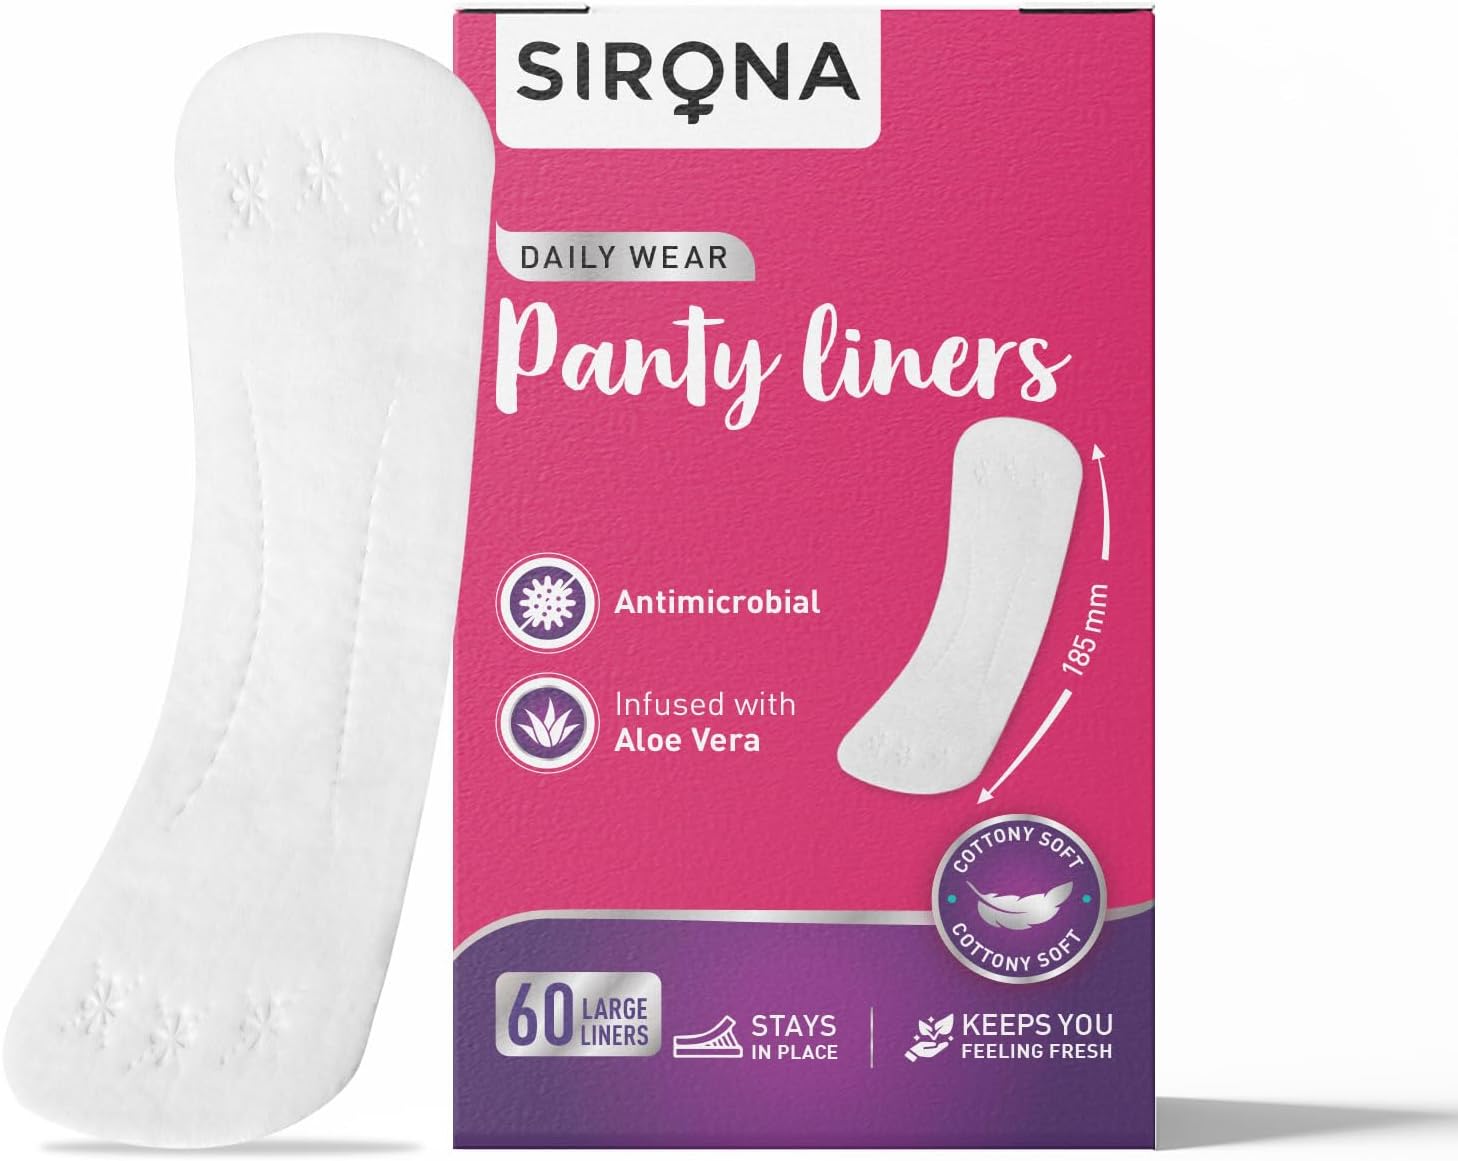 Sirona Dry Comfort Panty Liners Soft Cottony Panty Liner Pads For Women – Large, 60 Liners